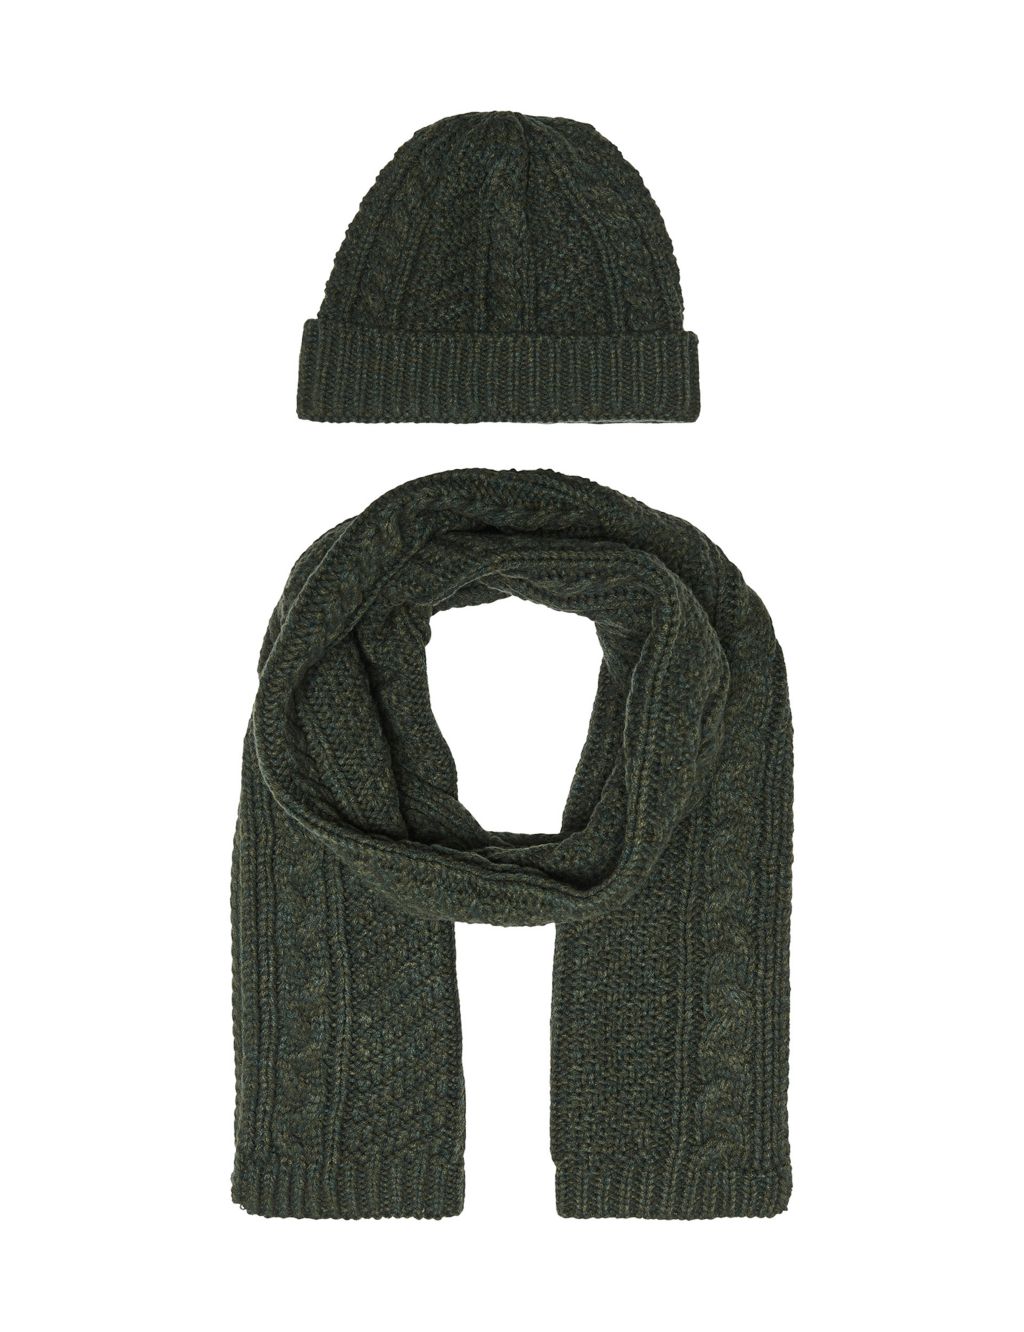 2pc Textured Knitted Beanie Hat & Scarf Set image 1